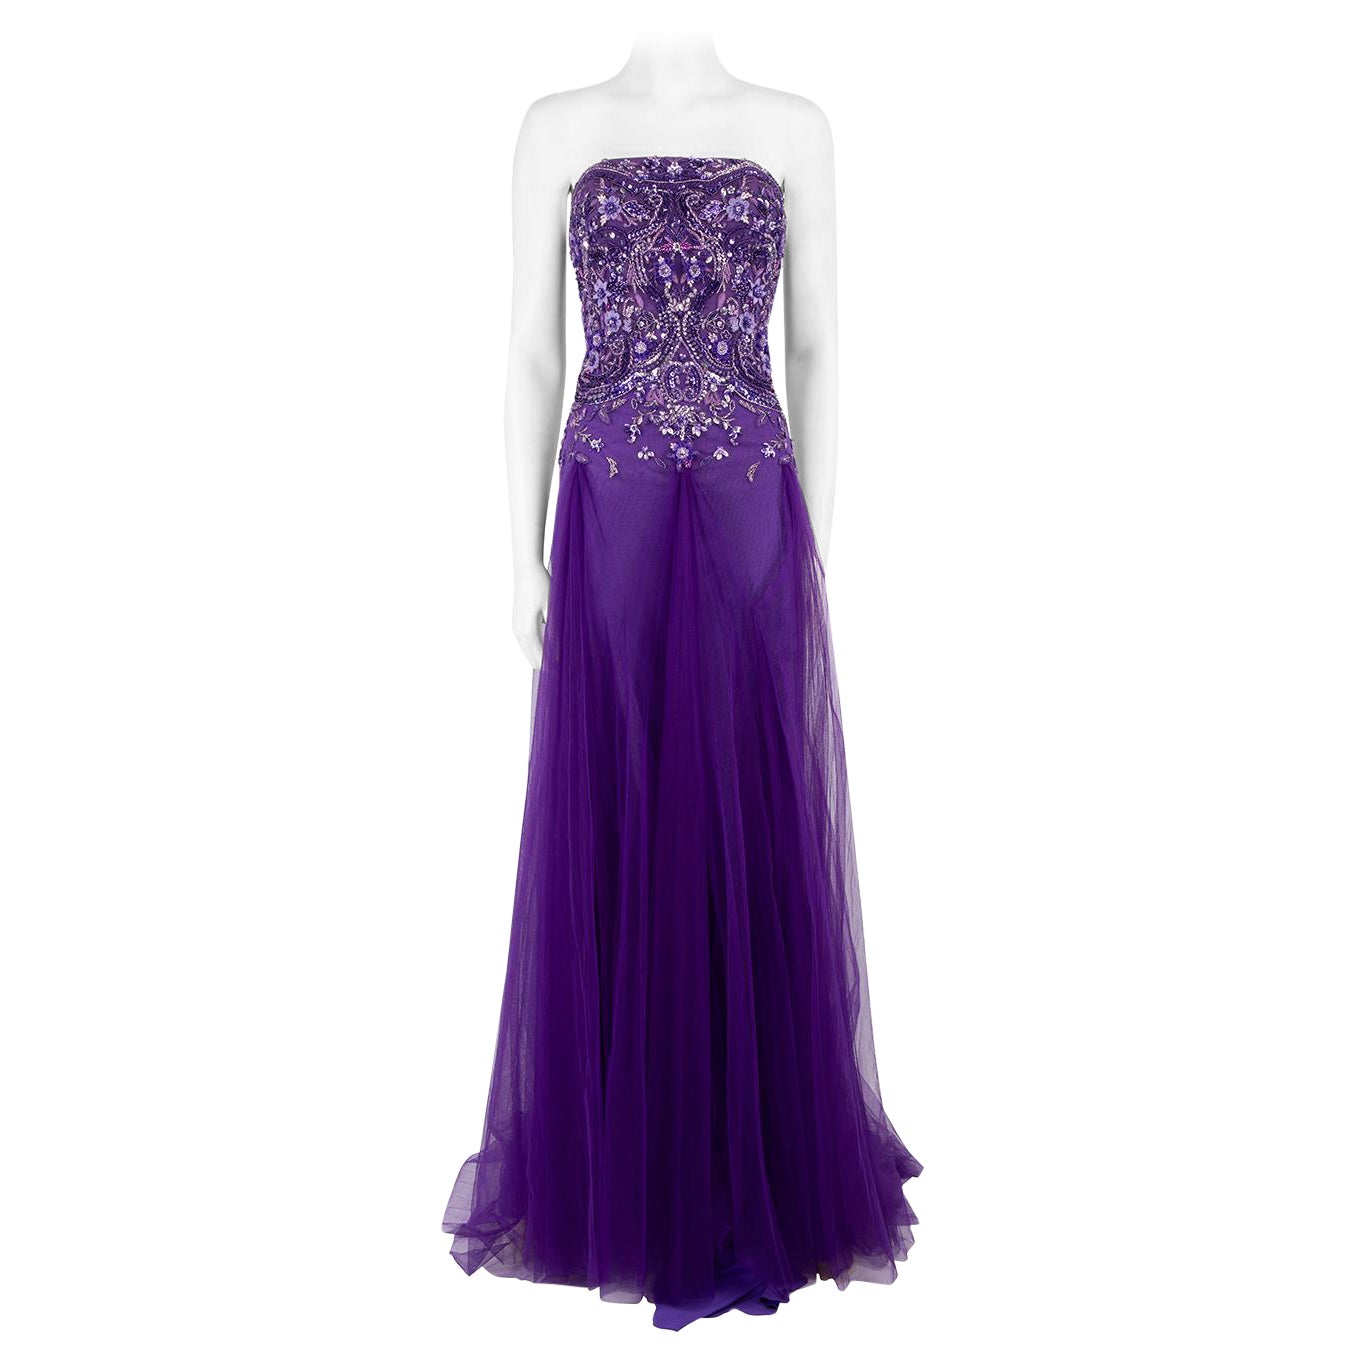 Honayda SS23 Purple Embellished Strapless Gown Size S For Sale